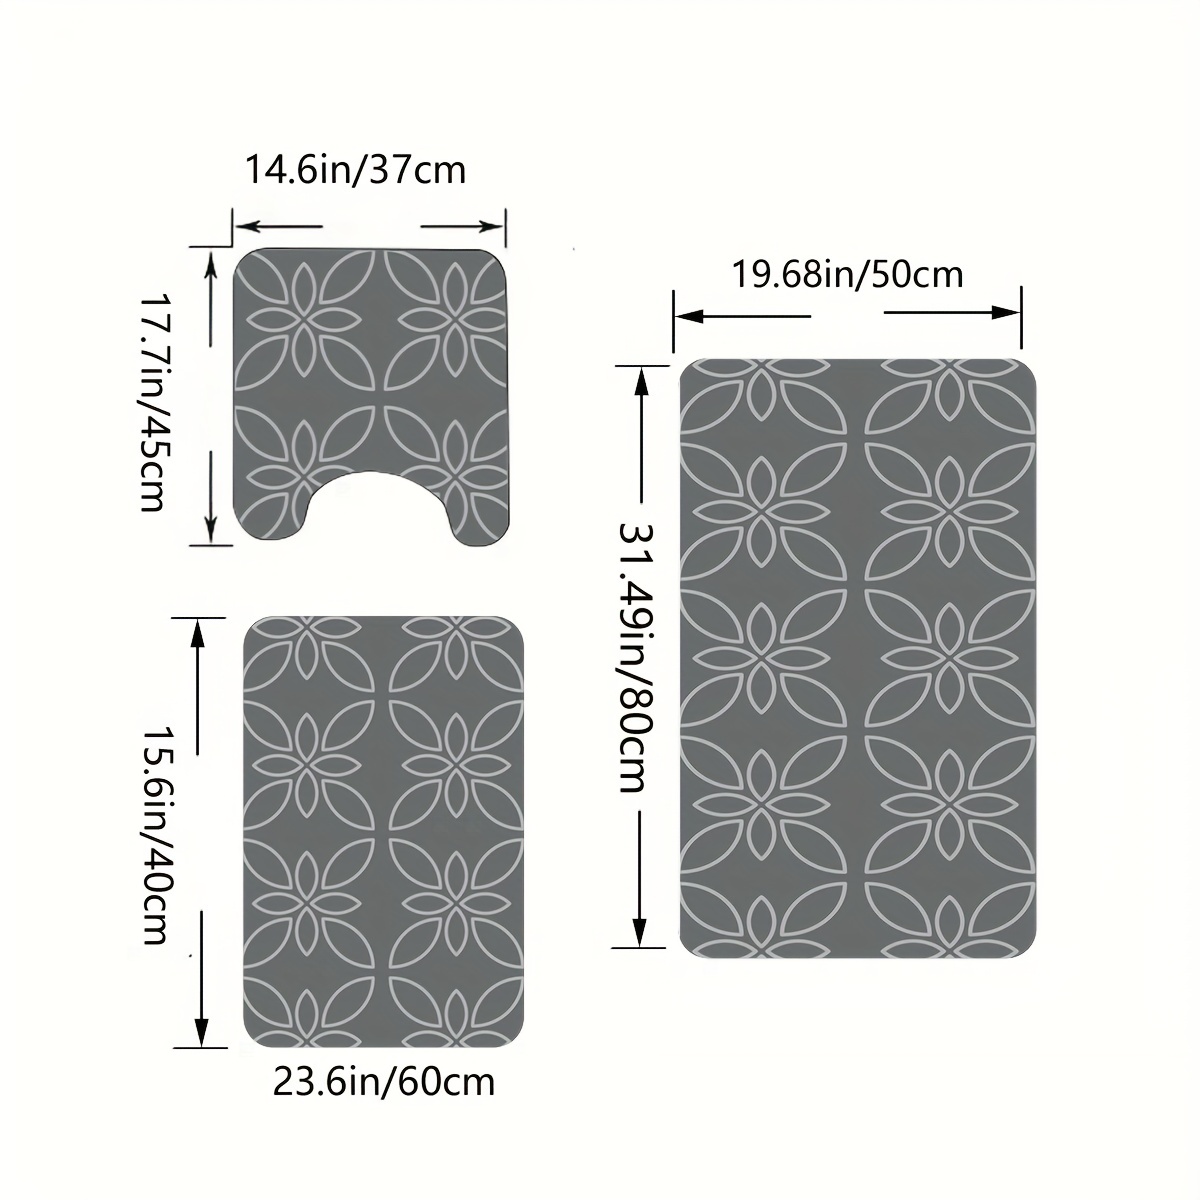 1pc Memory Sponge Bath Mat With Grid Pattern, Non-slip And